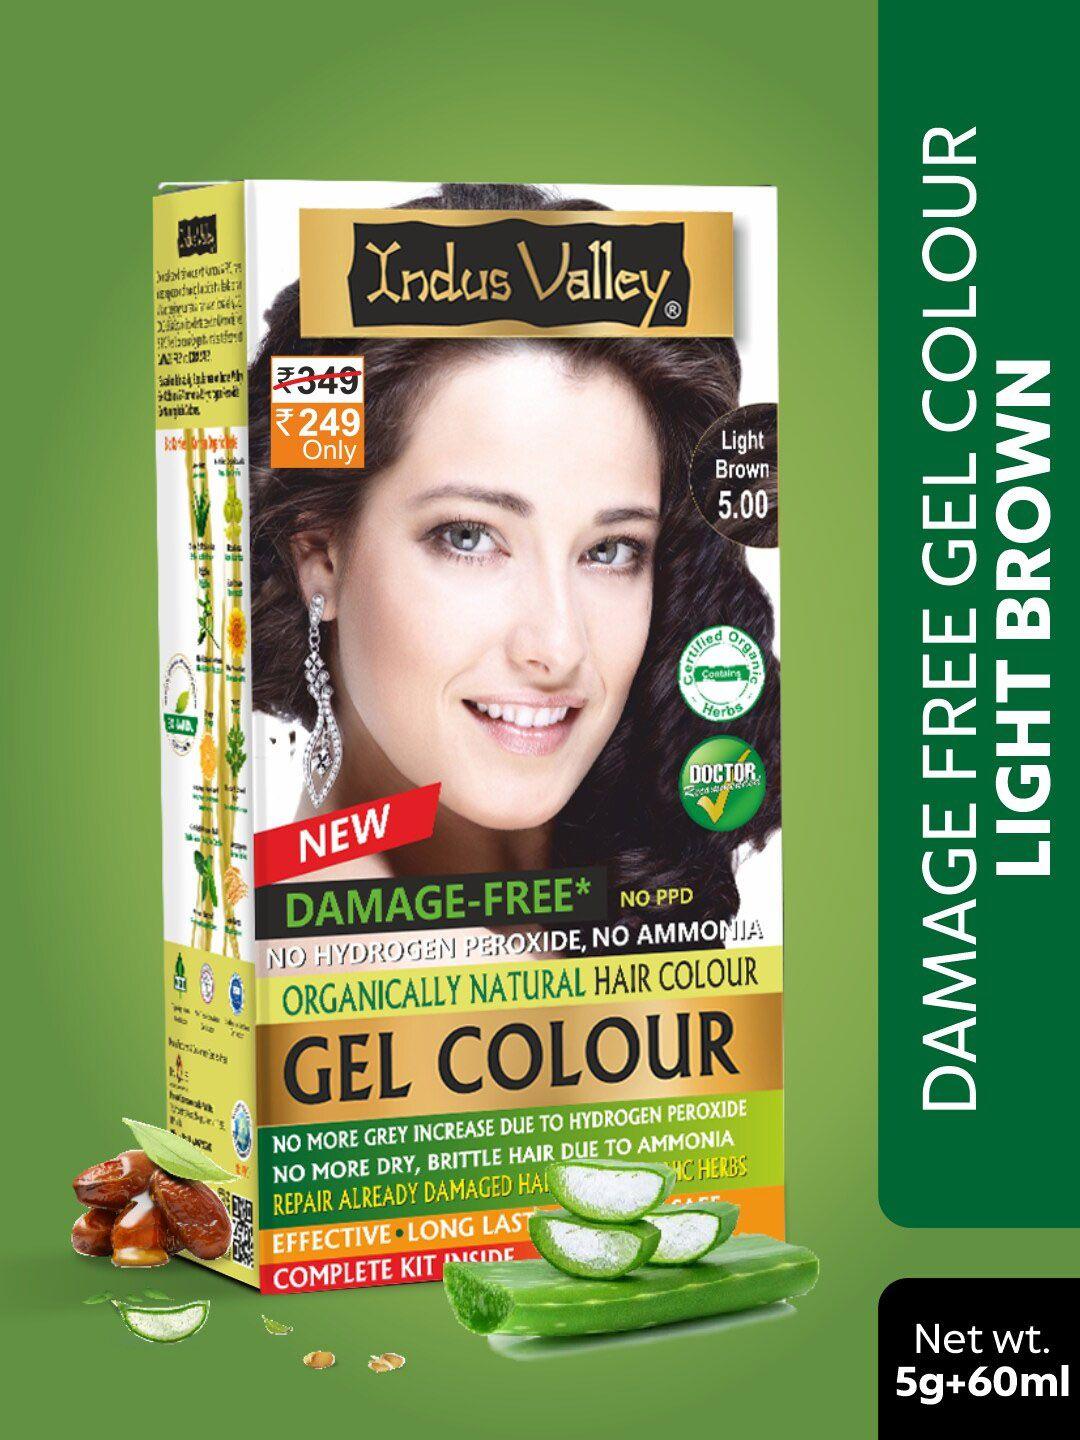 indus valley damage free gel hair colour trial pack 65 g - light brown